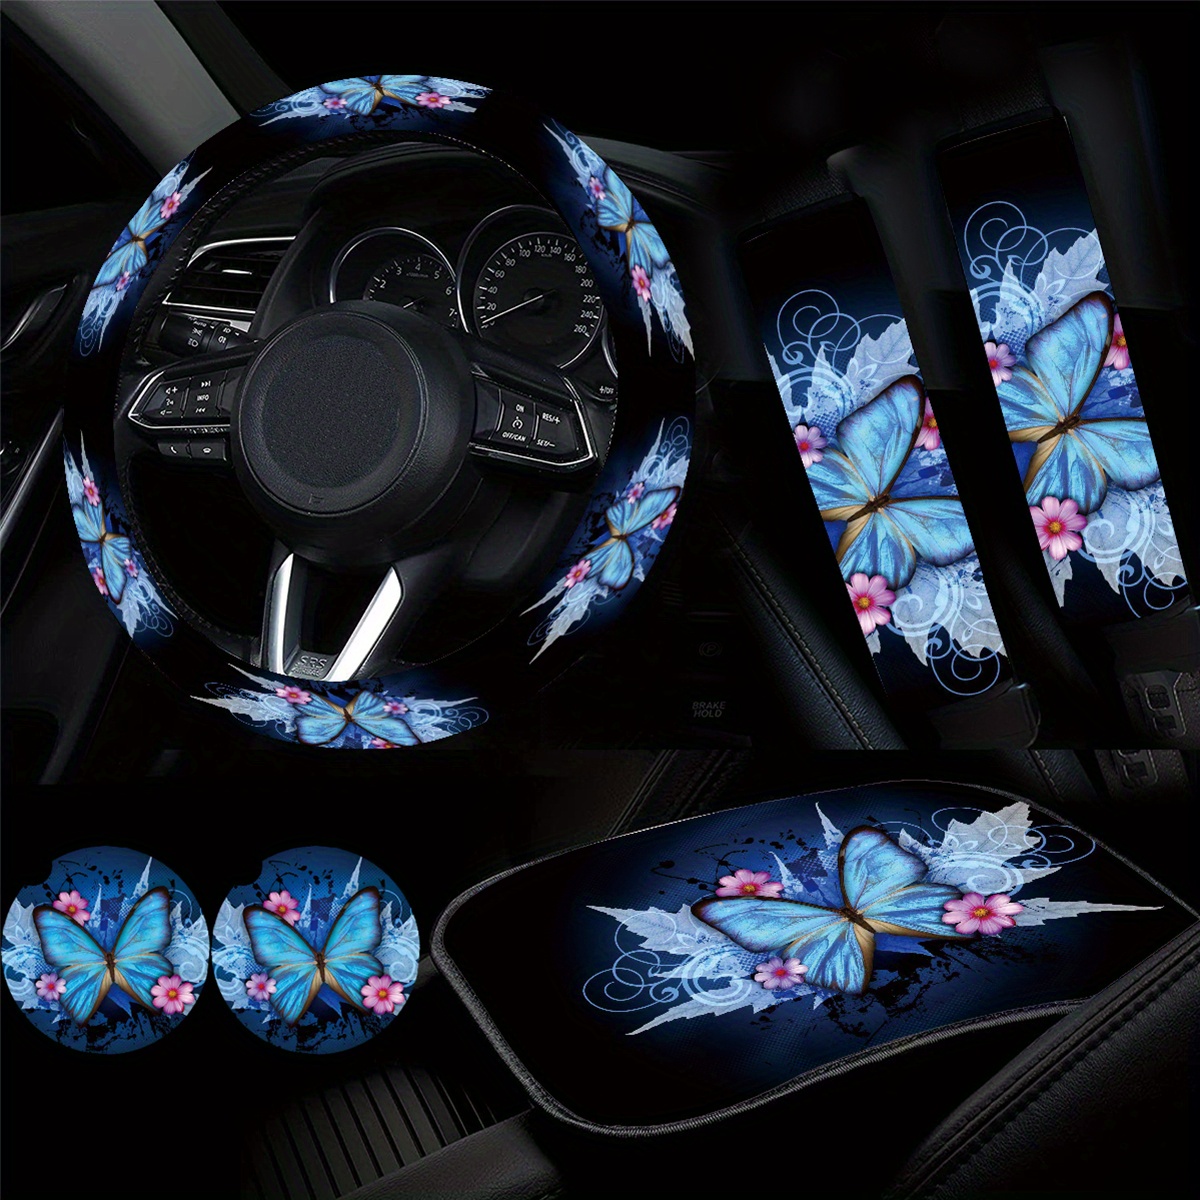 2PCS Cute Floral Ceramic Car Cup Holder Coaster - Groovy Retro Aesthetic -  Adorable Car Cup Holder Accessories with Floral Design - Coaster Mat for